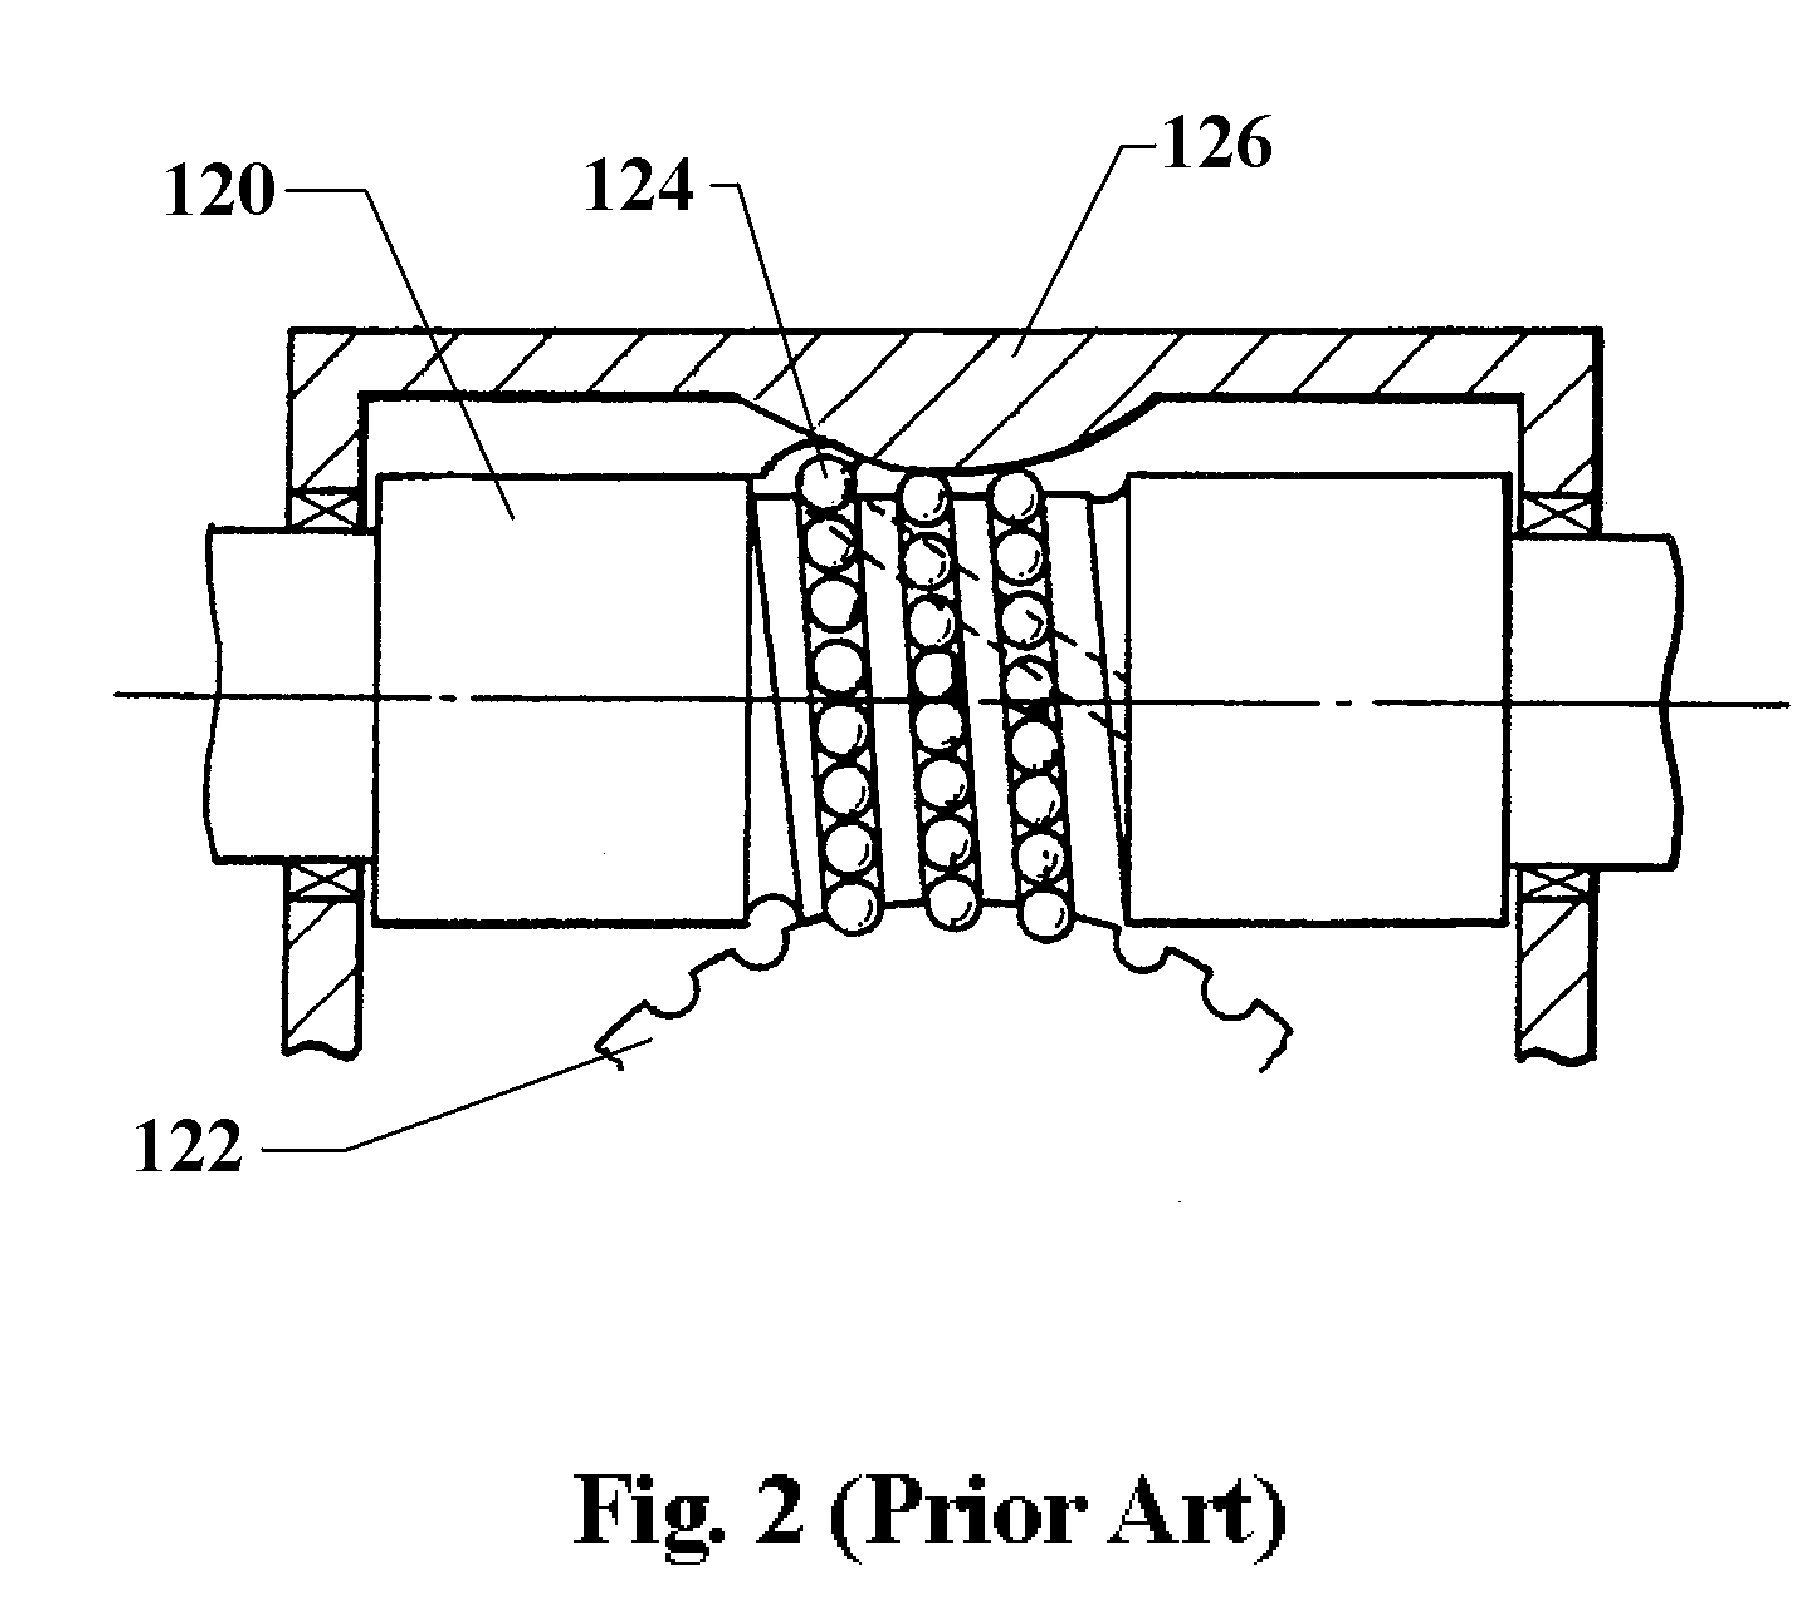 Self-Retaining Recirculating Ball-Worm and Gear Device